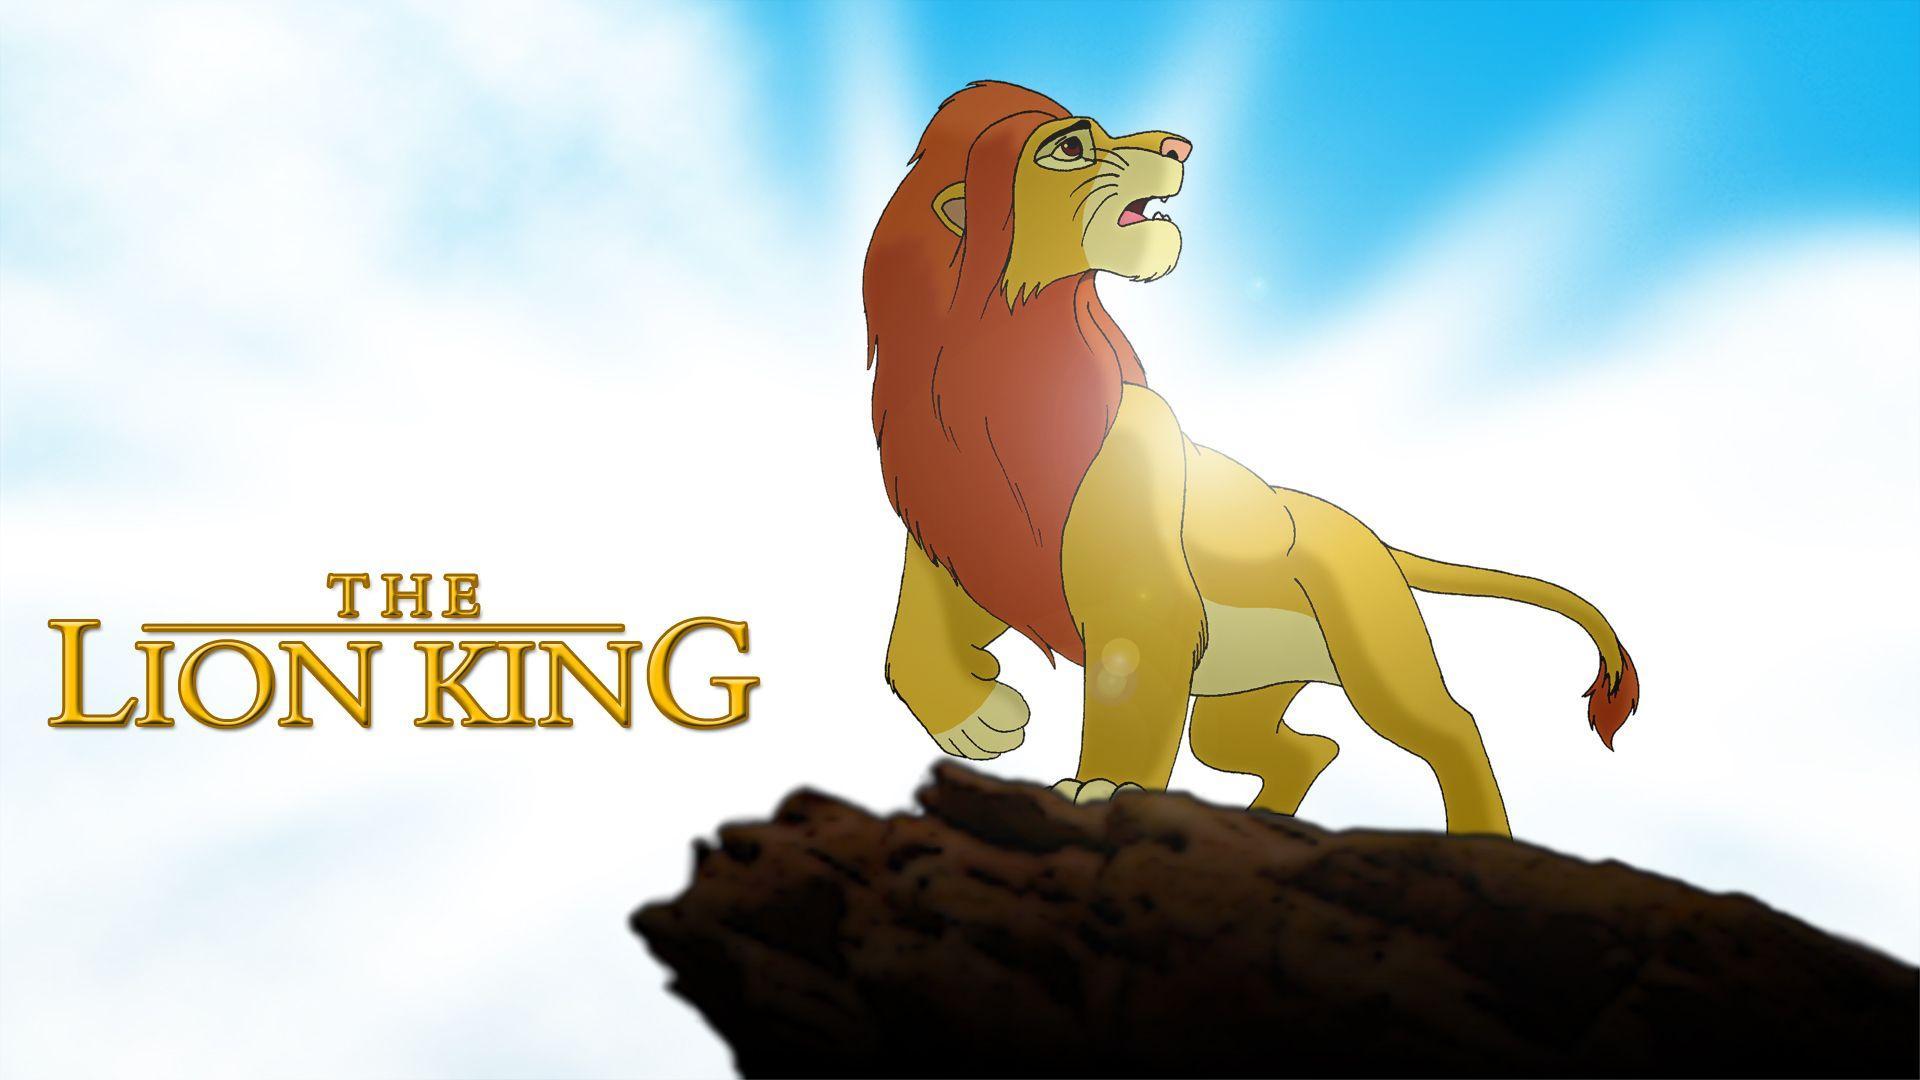 The Lion King the Lion King Wallpaper Image for Mac